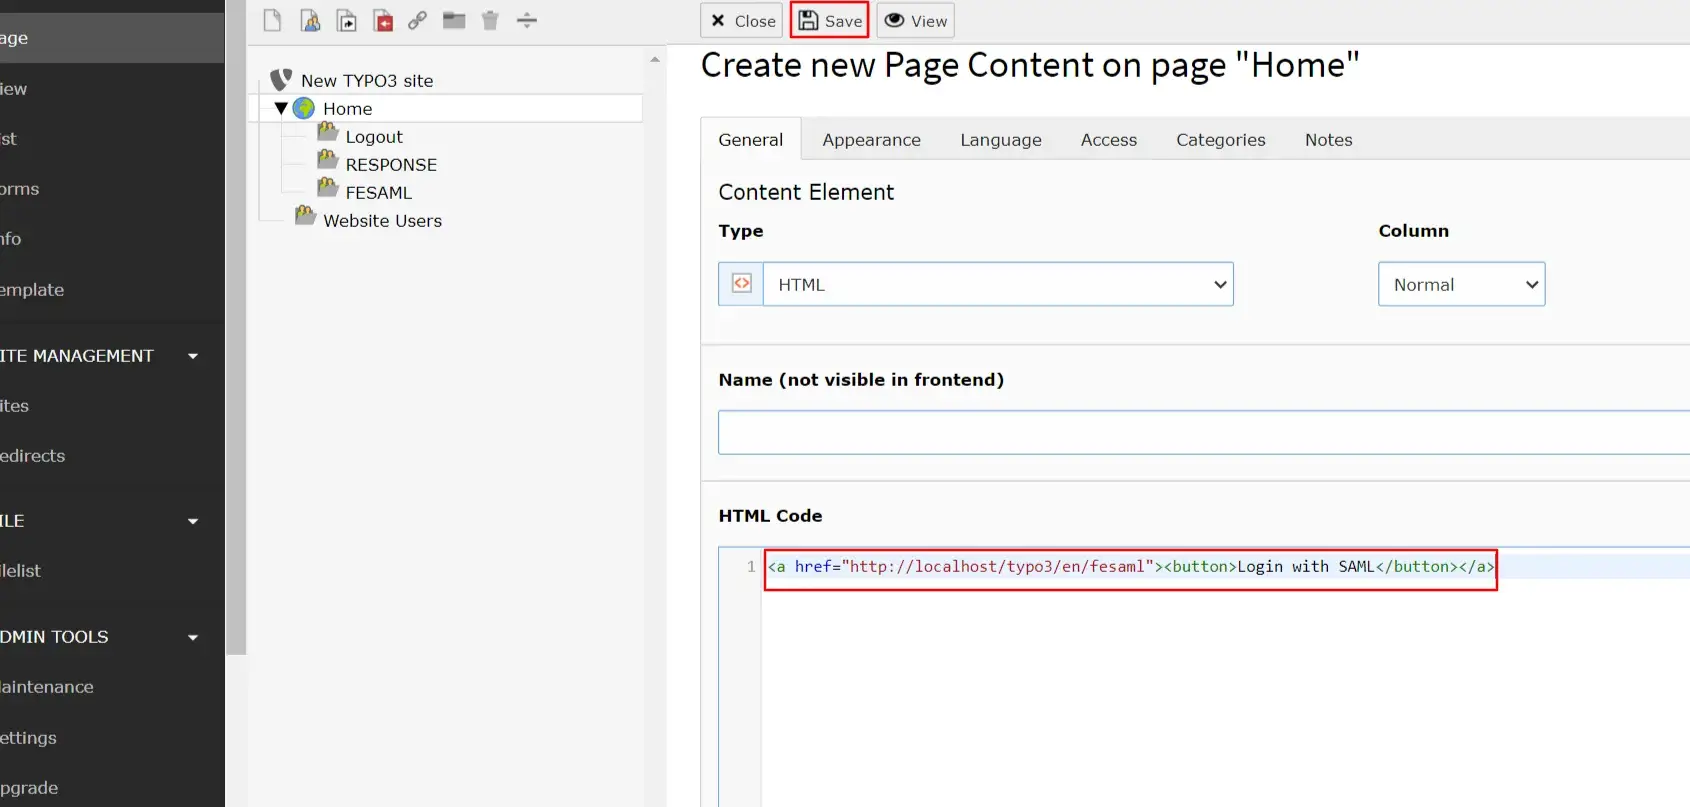 Insert button code to SSO into TYPO3